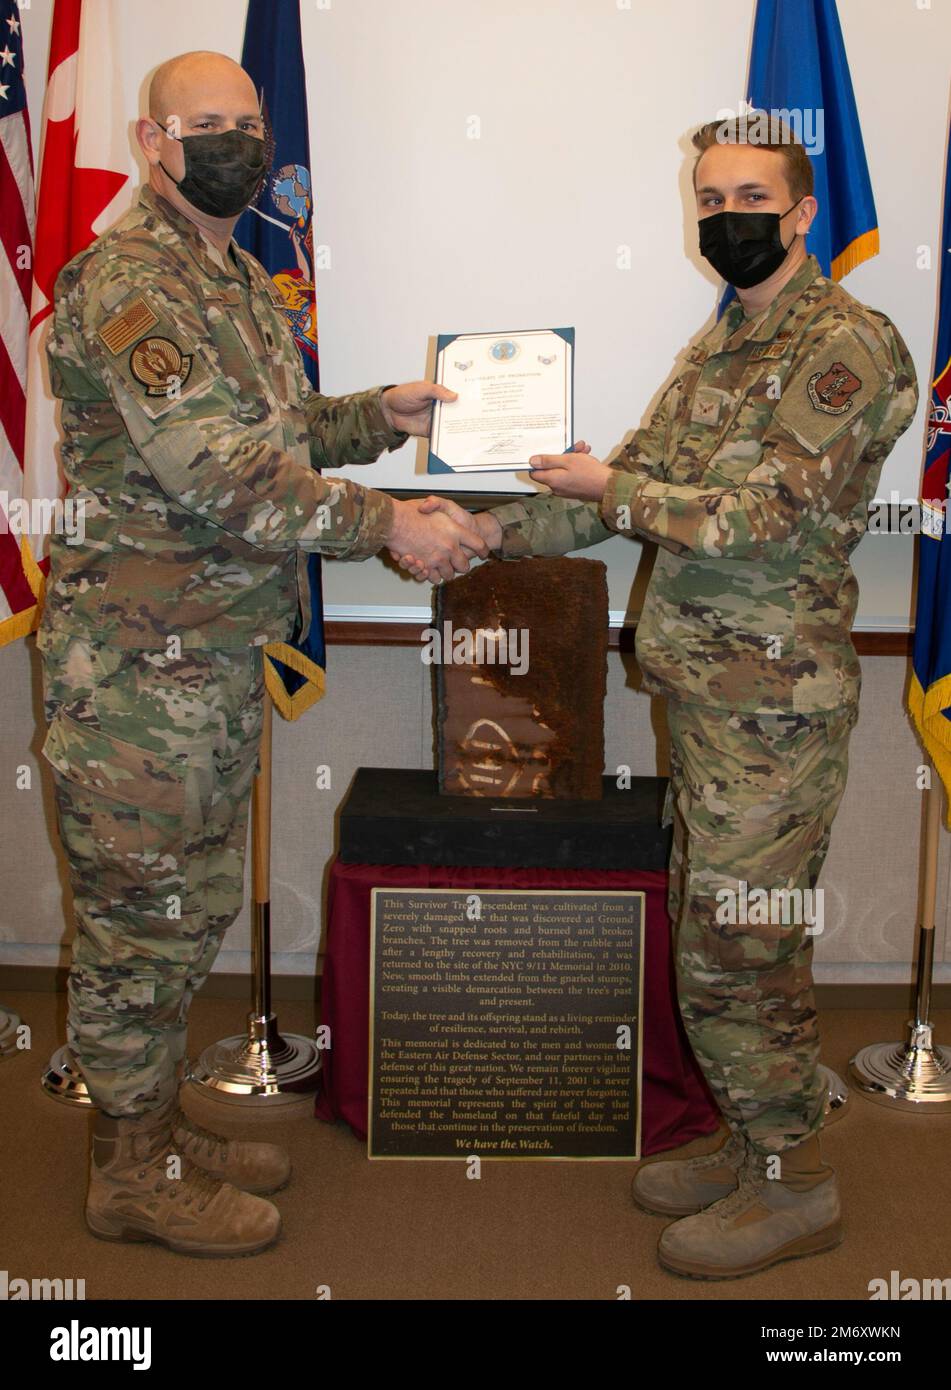 Senior Airman Brandon Keller, right, was promoted at a recent ceremony held at the Eastern Air Defense Sector. Lt. Col. Jason Taylor, Director of Operations at the 224th Support Squadron, was the promoting officer. Stock Photo